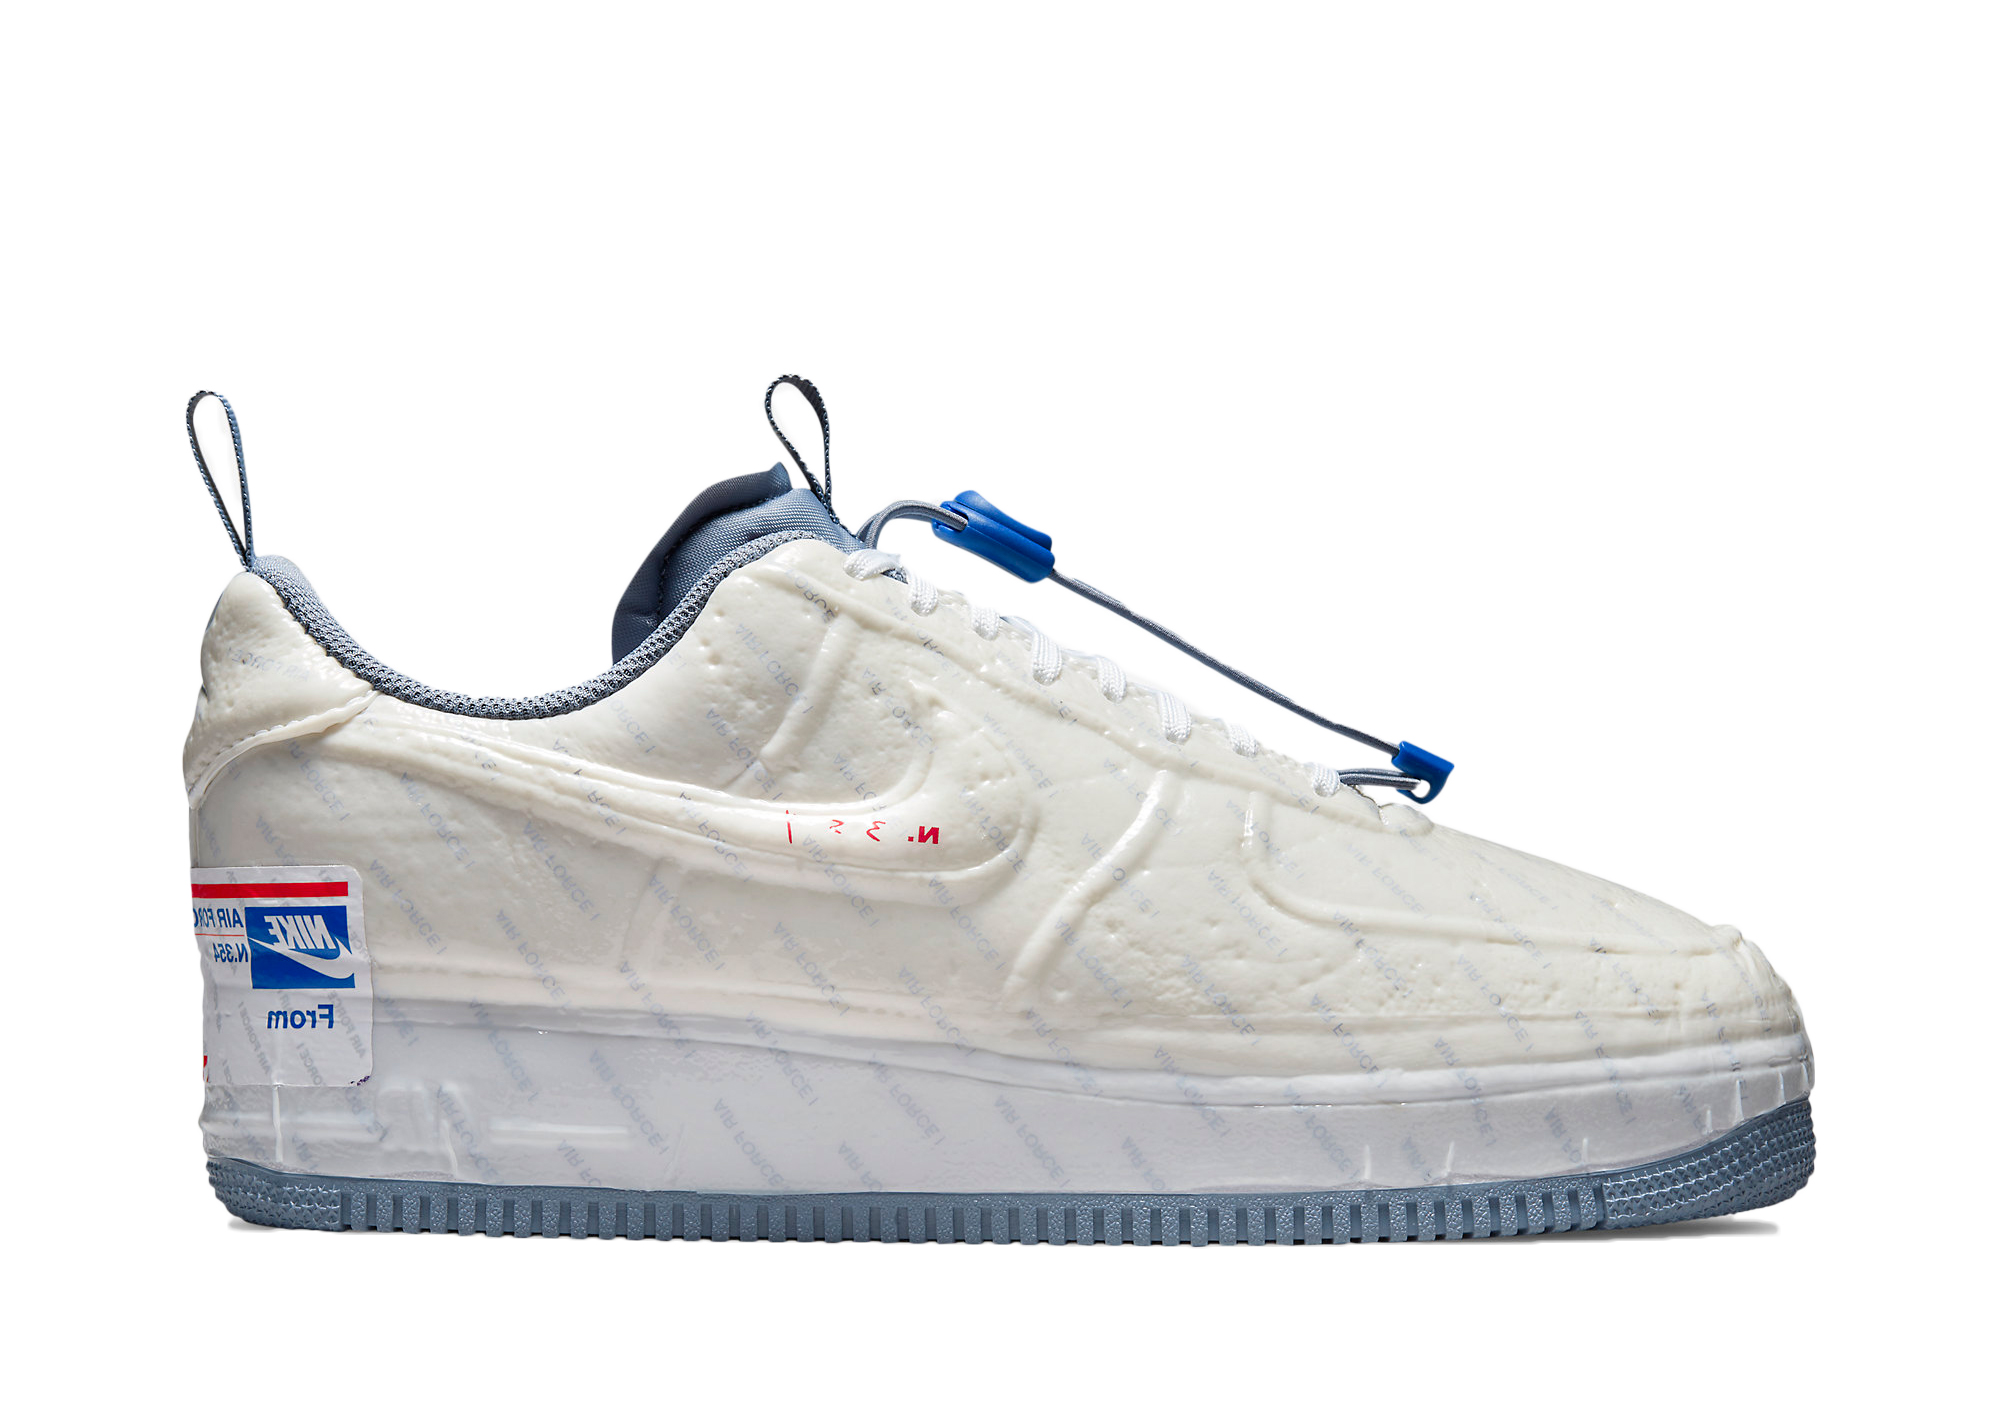 where to get nike air force 1